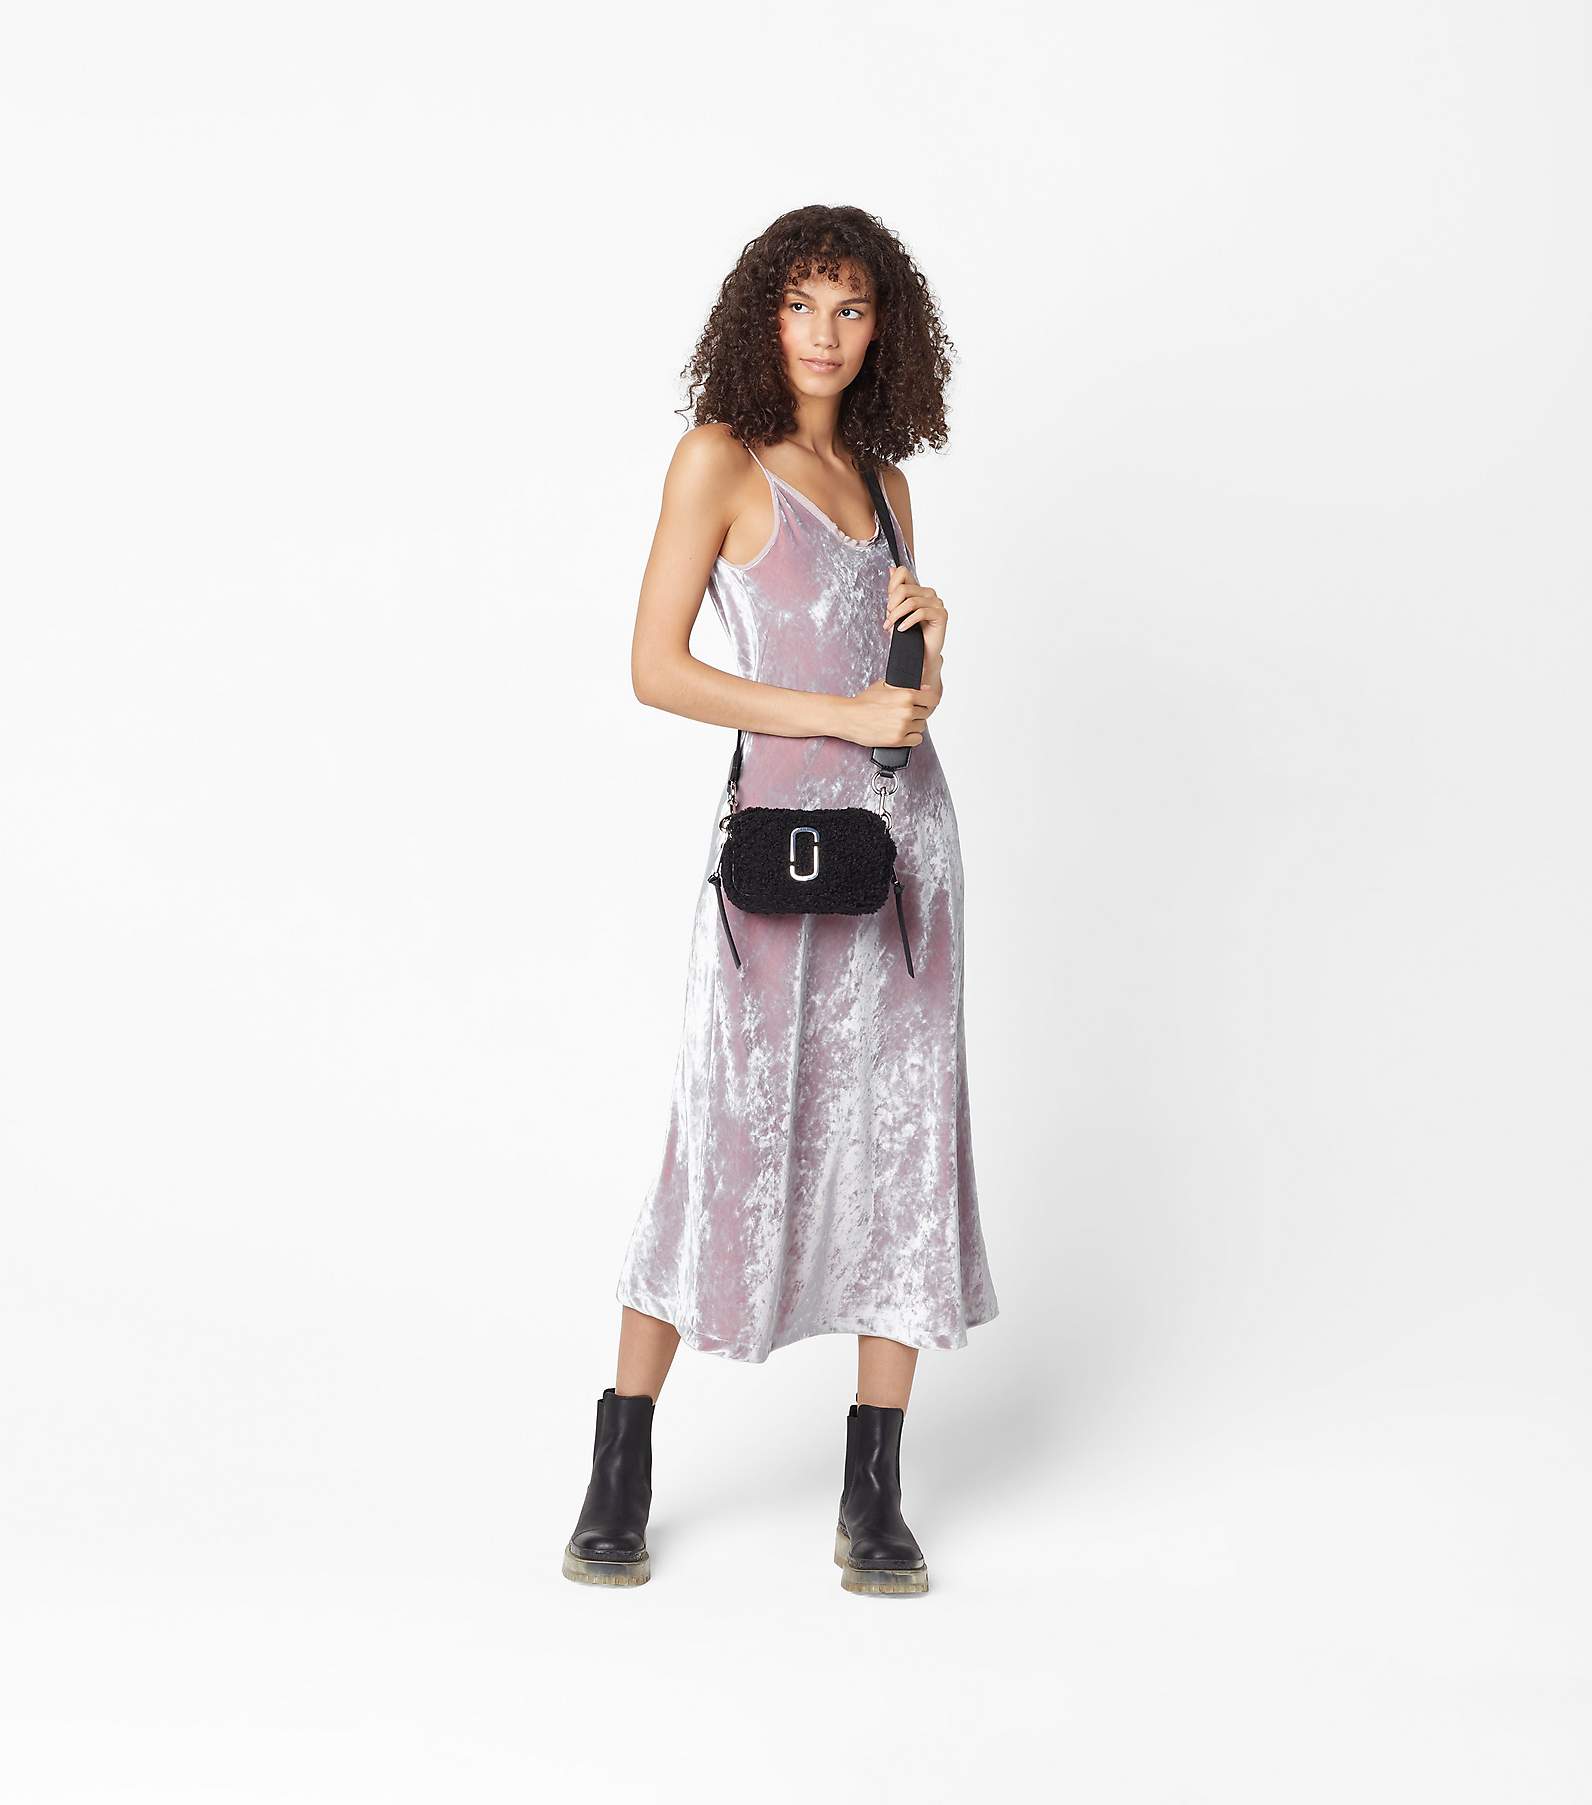 Marc Jacobs Snapshot Outfit  Marc jacobs snapshot bag, Marc jacobs snapshot  bag outfit, Outfits